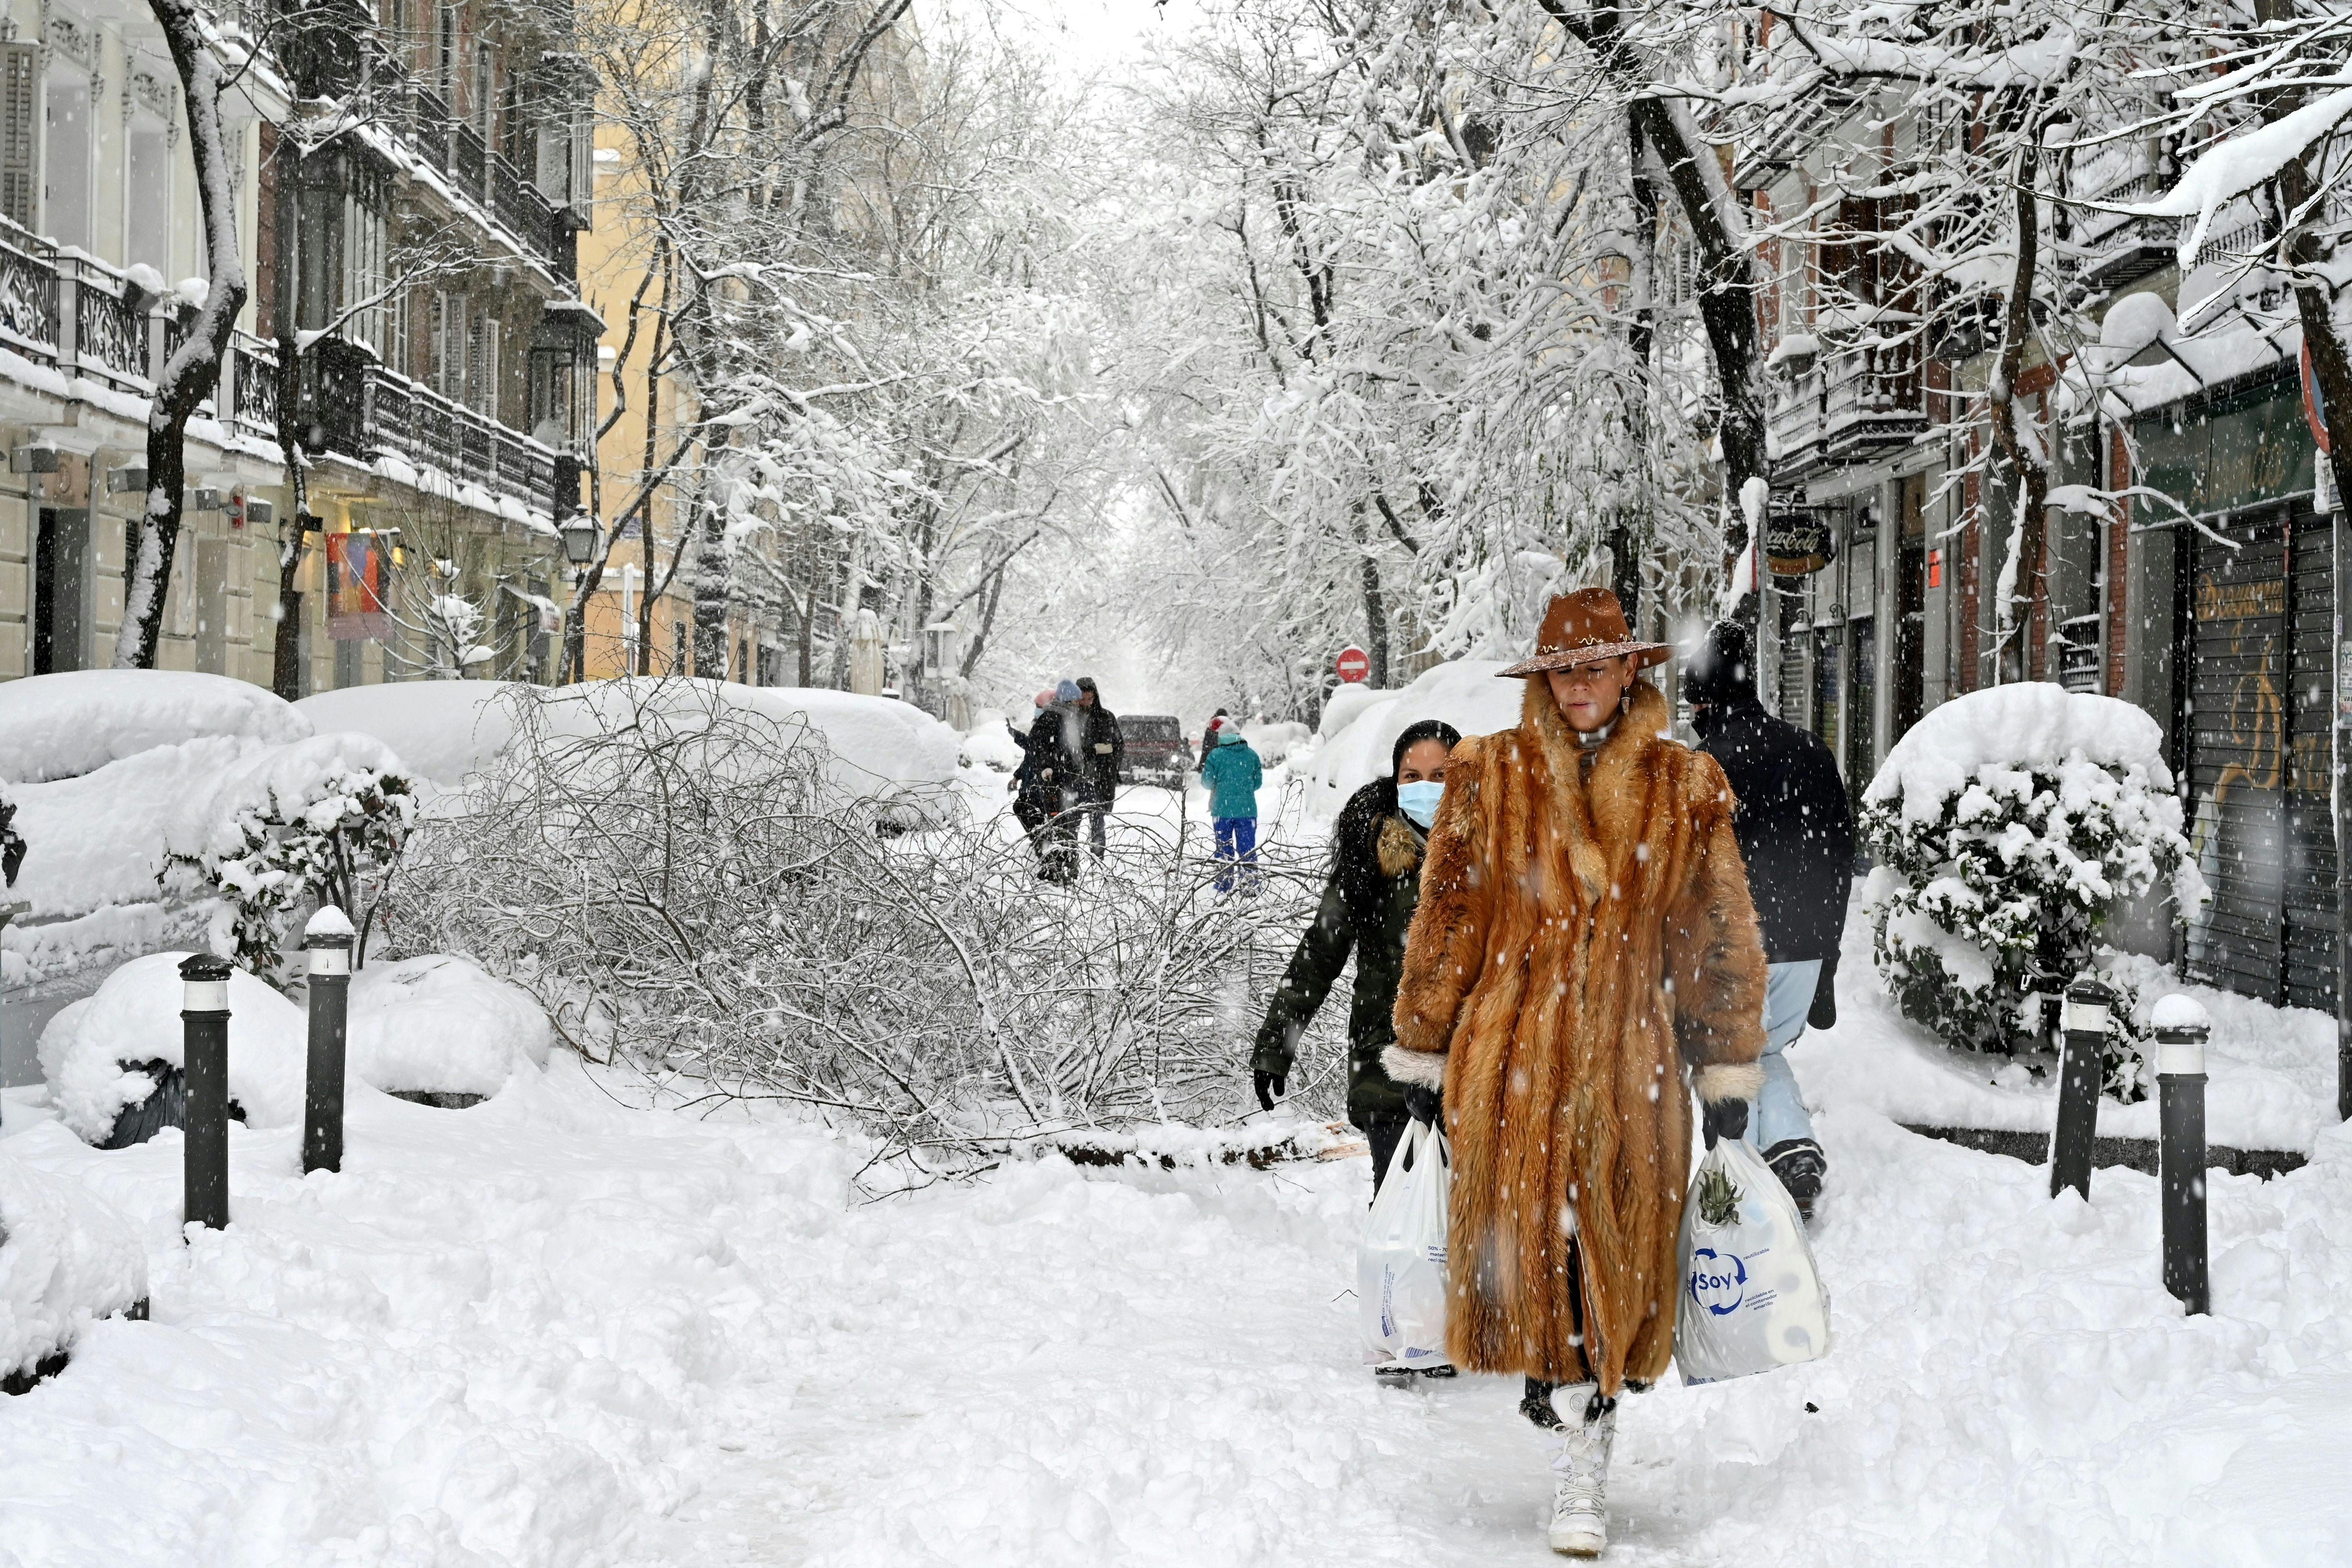 From snowfall to profit: Monetizing winter trends across industries